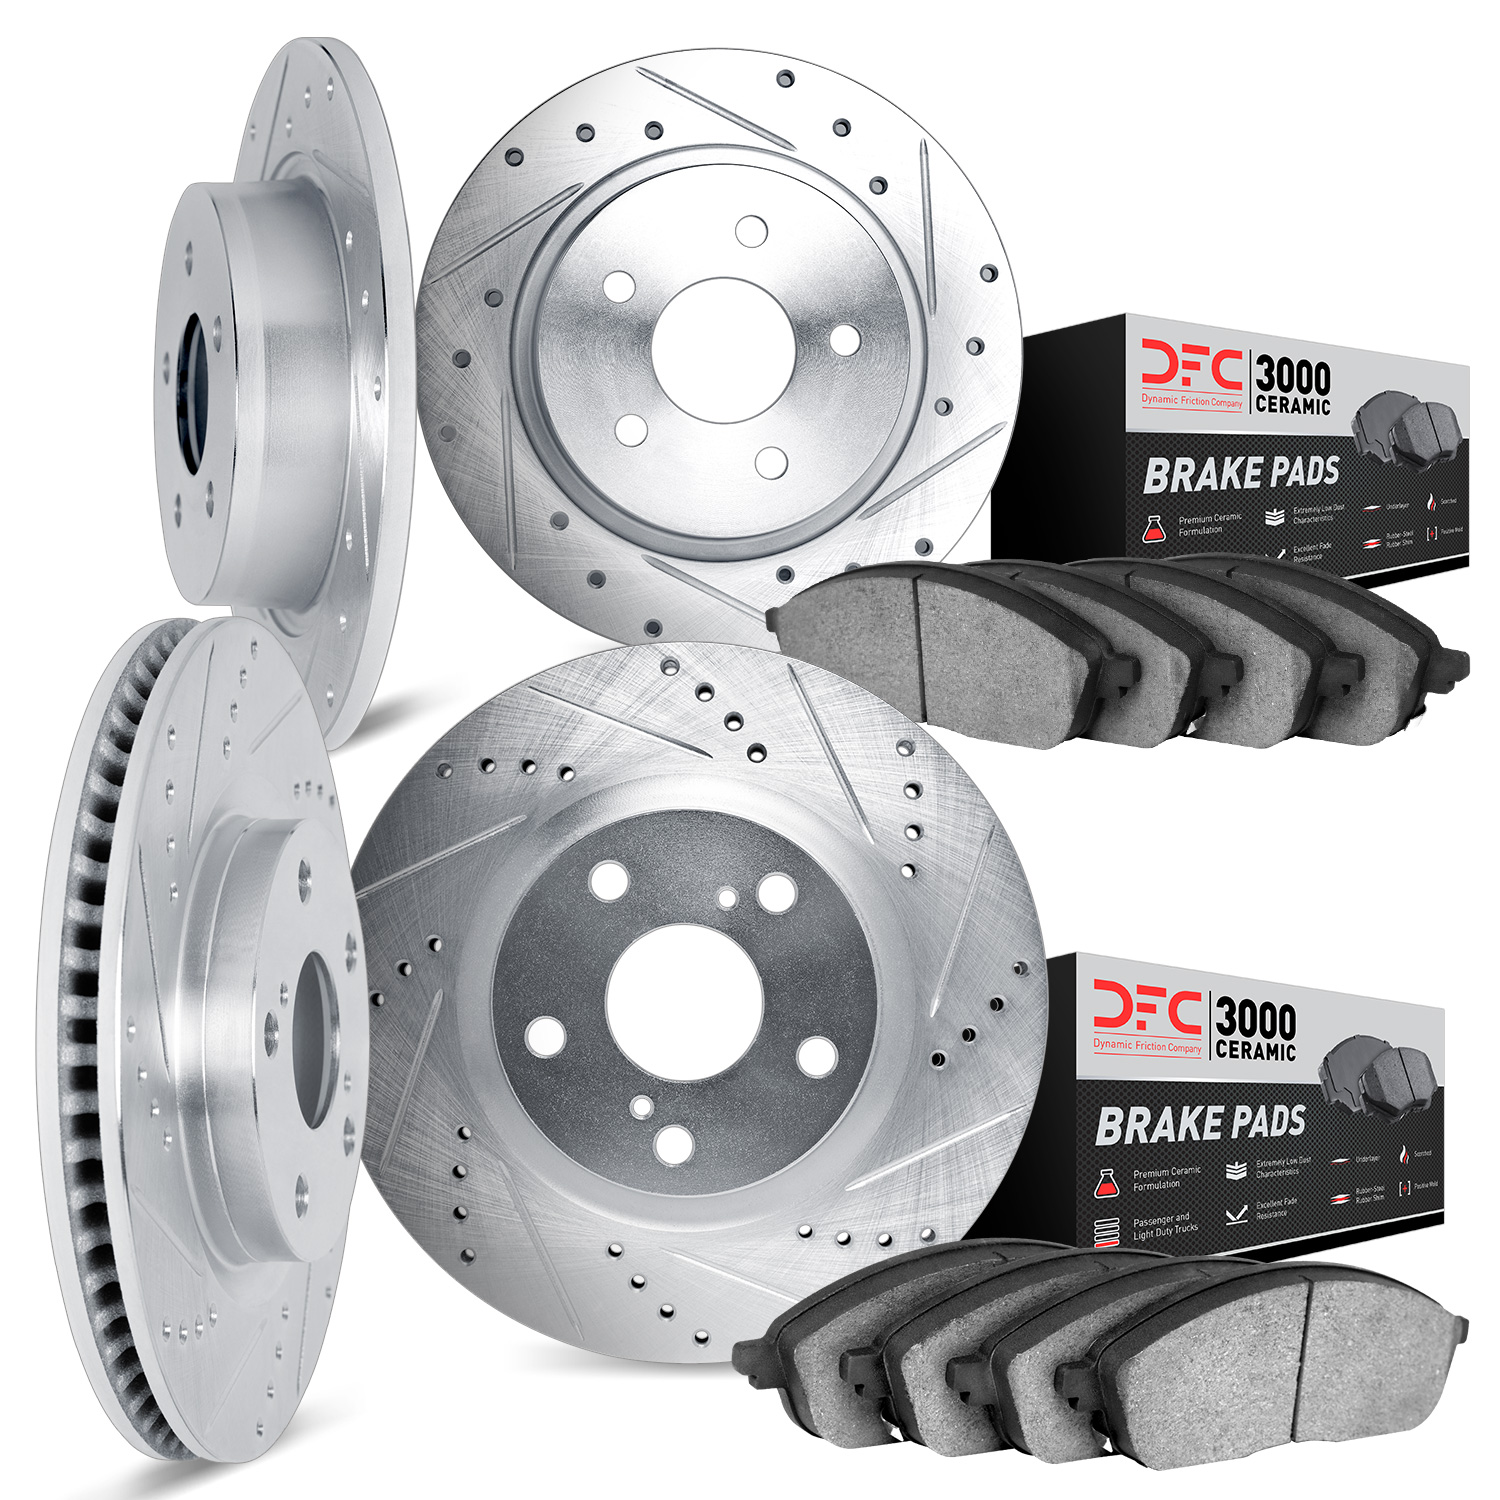 7304-54113 Drilled/Slotted Brake Rotor with 3000-Series Ceramic Brake Pads Kit [Silver], 2013-2018 Ford/Lincoln/Mercury/Mazda, P